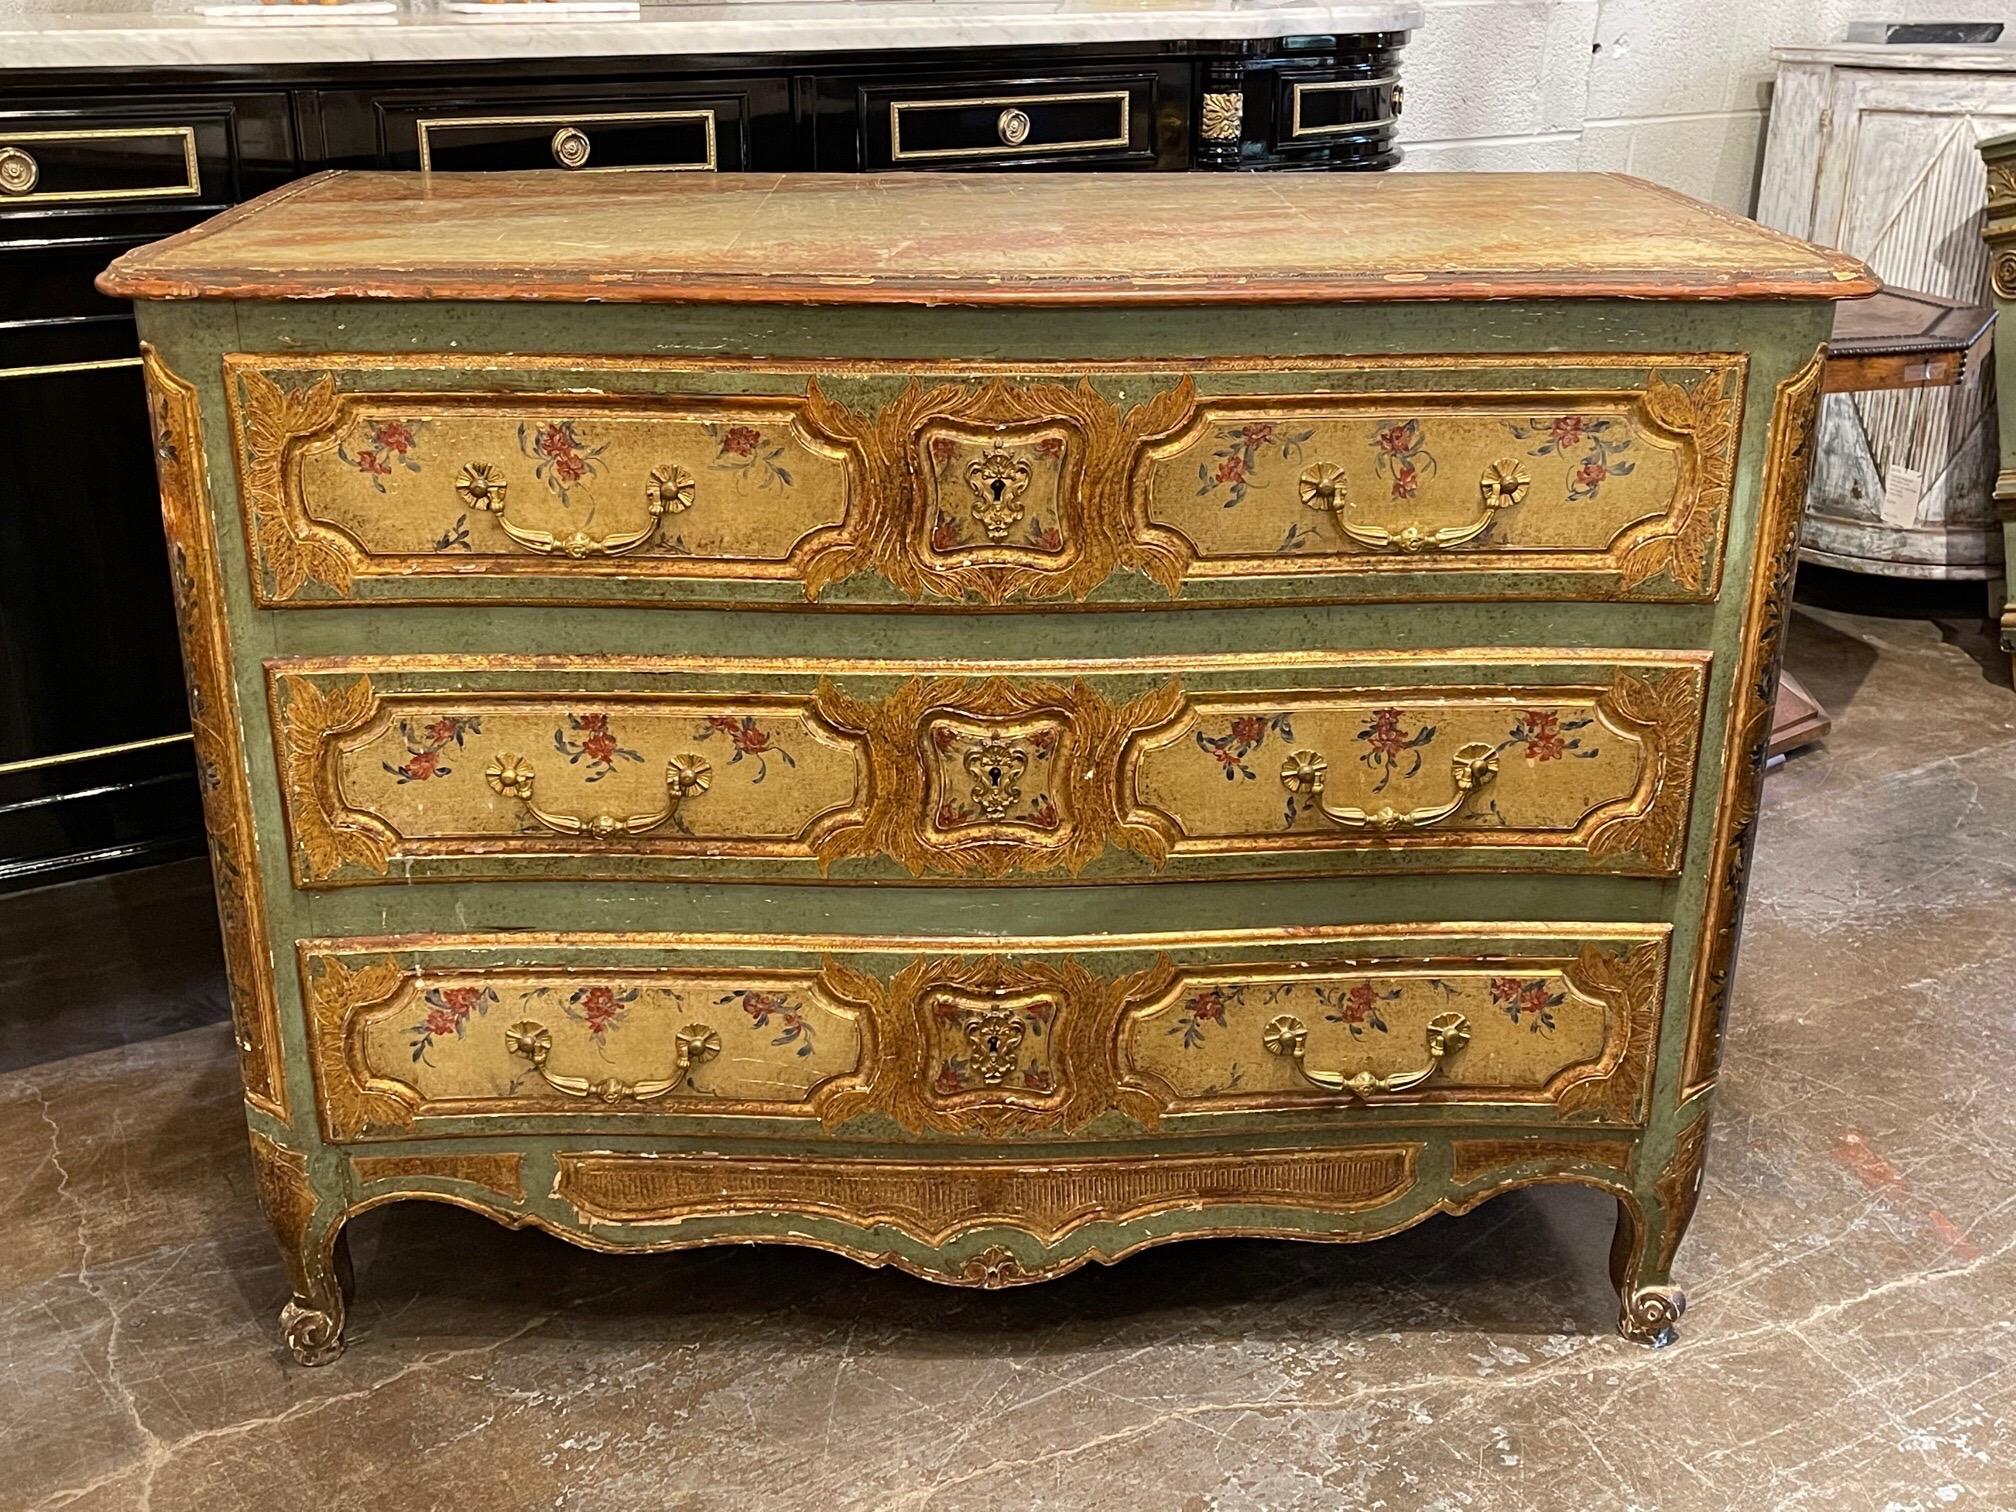 Lovely early 19th century French Louis XV style painted commode. Featuring beautiful floral images and the colors of gold, yellow, pink and green. A gorgeous decorative piece!!